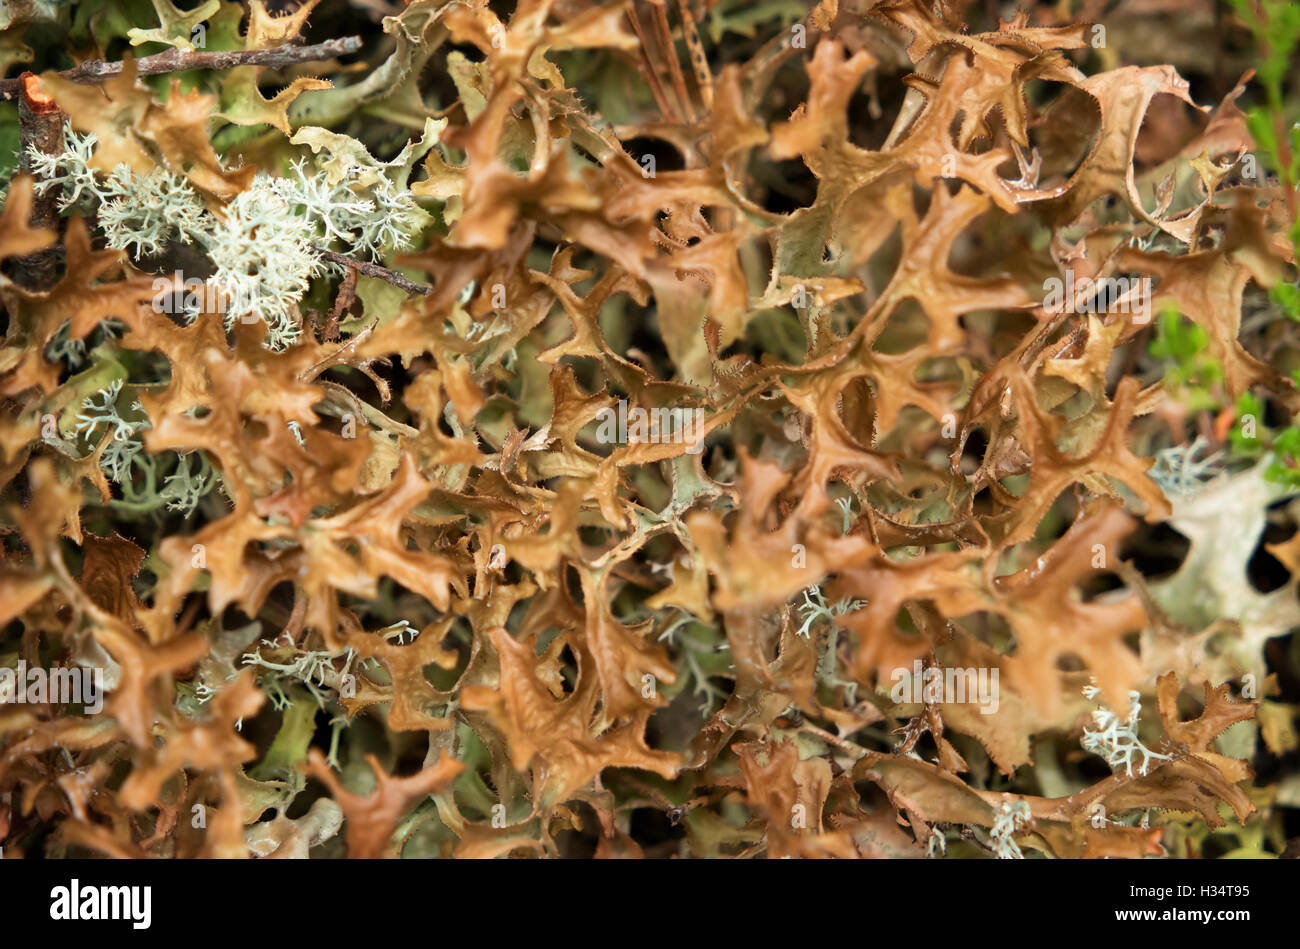 Iceland moss - Cetraria islandica in the forest, close up shot Stock Photo